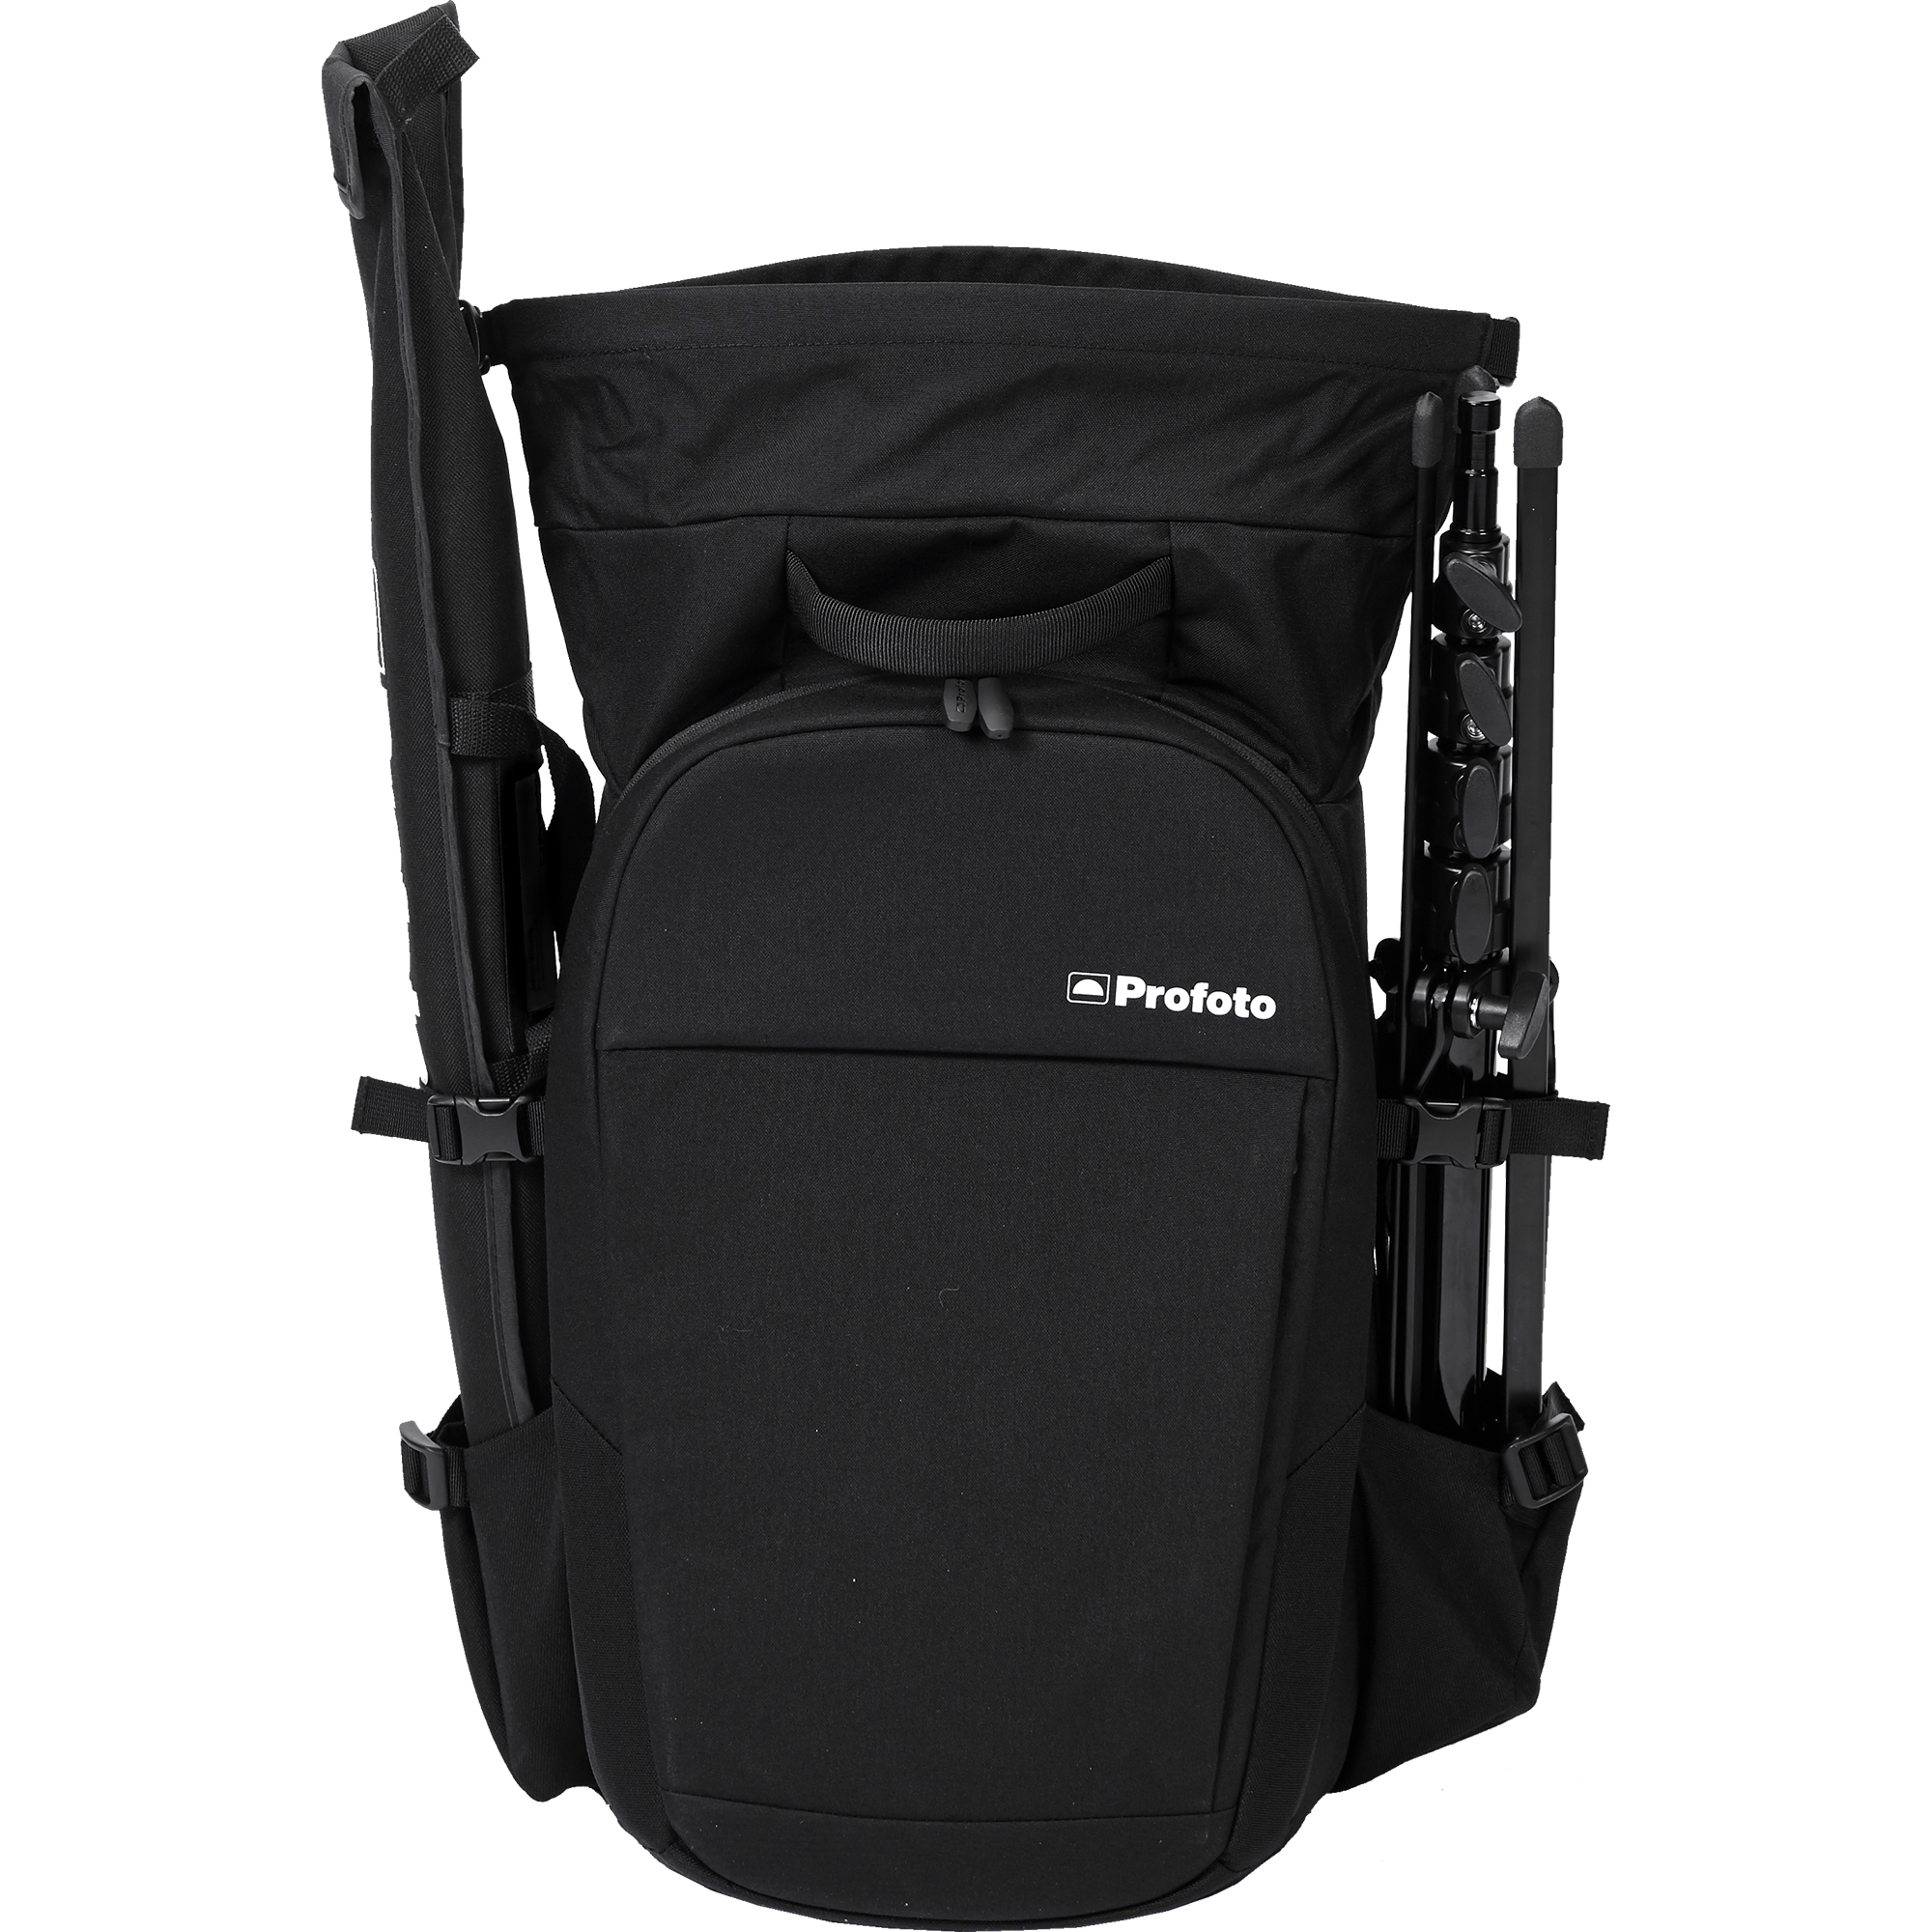 330241 G Profoto Core Back Pack S Front Packed Rolltop Product Image